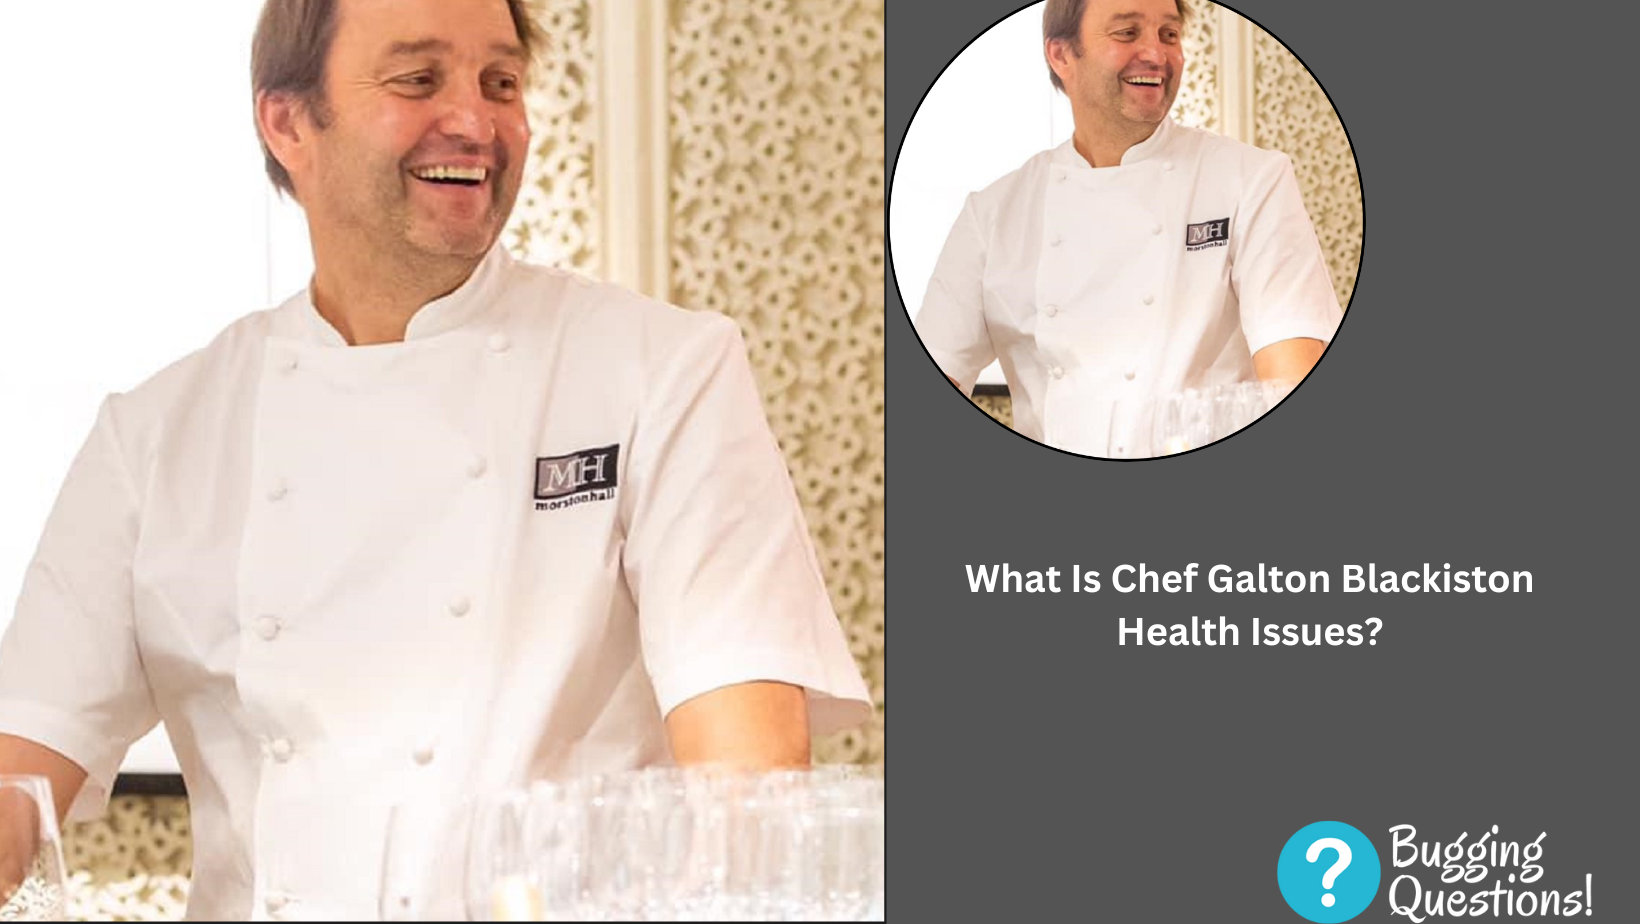 What Is Chef Galton Blackiston Health Issues?